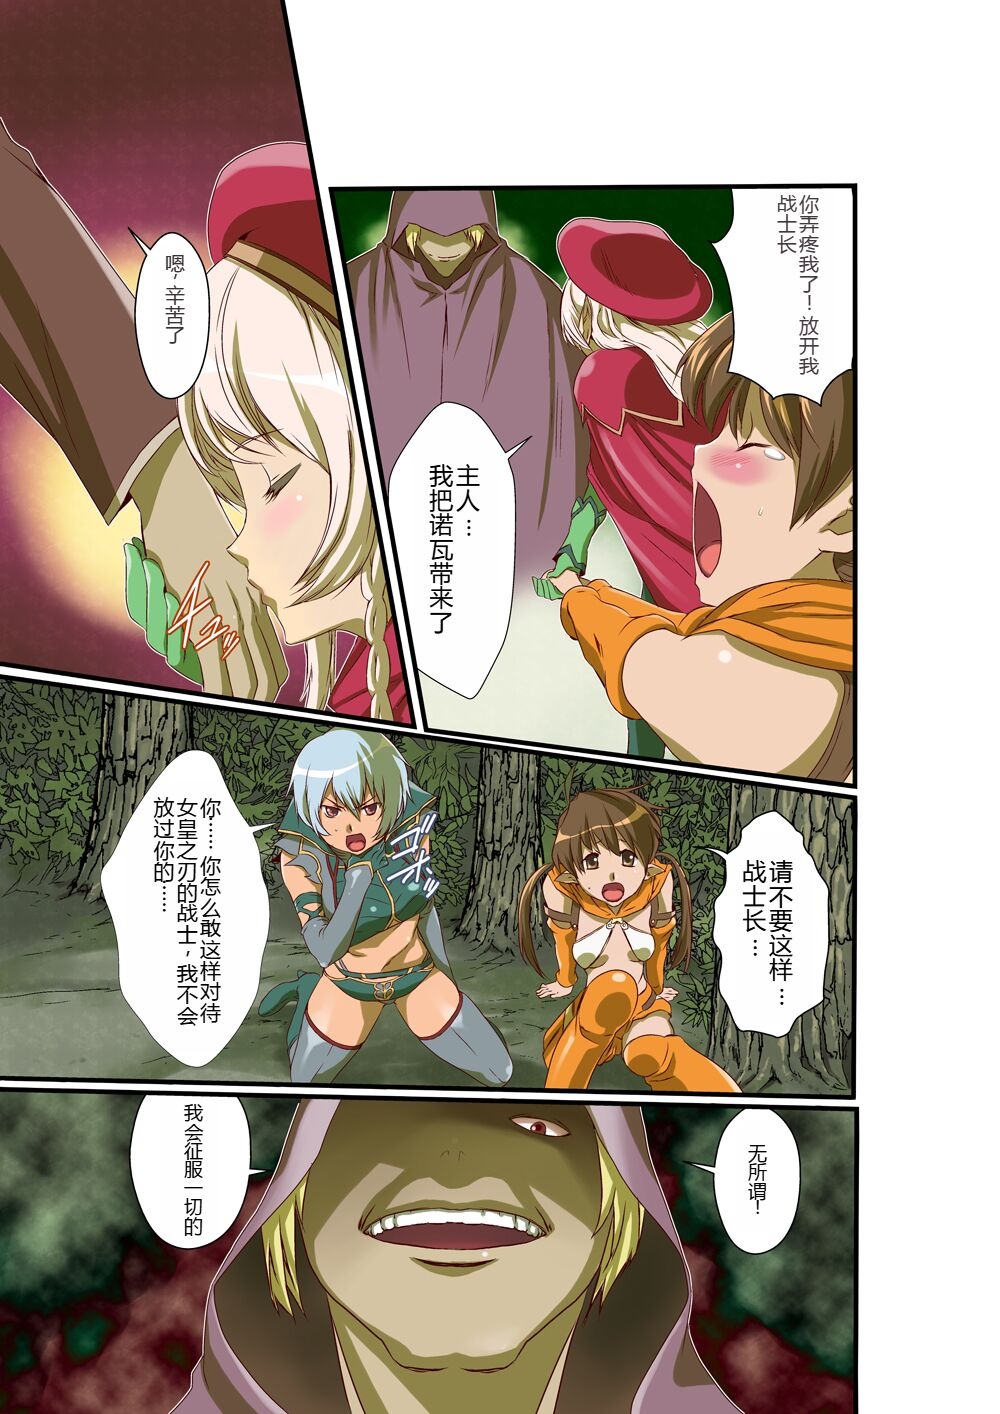 [Utsuro na Hitomi] Queen's *lade Mind-control Manga (Queen's Blade) [chinese] [lalala1234个人机翻汉化] 12